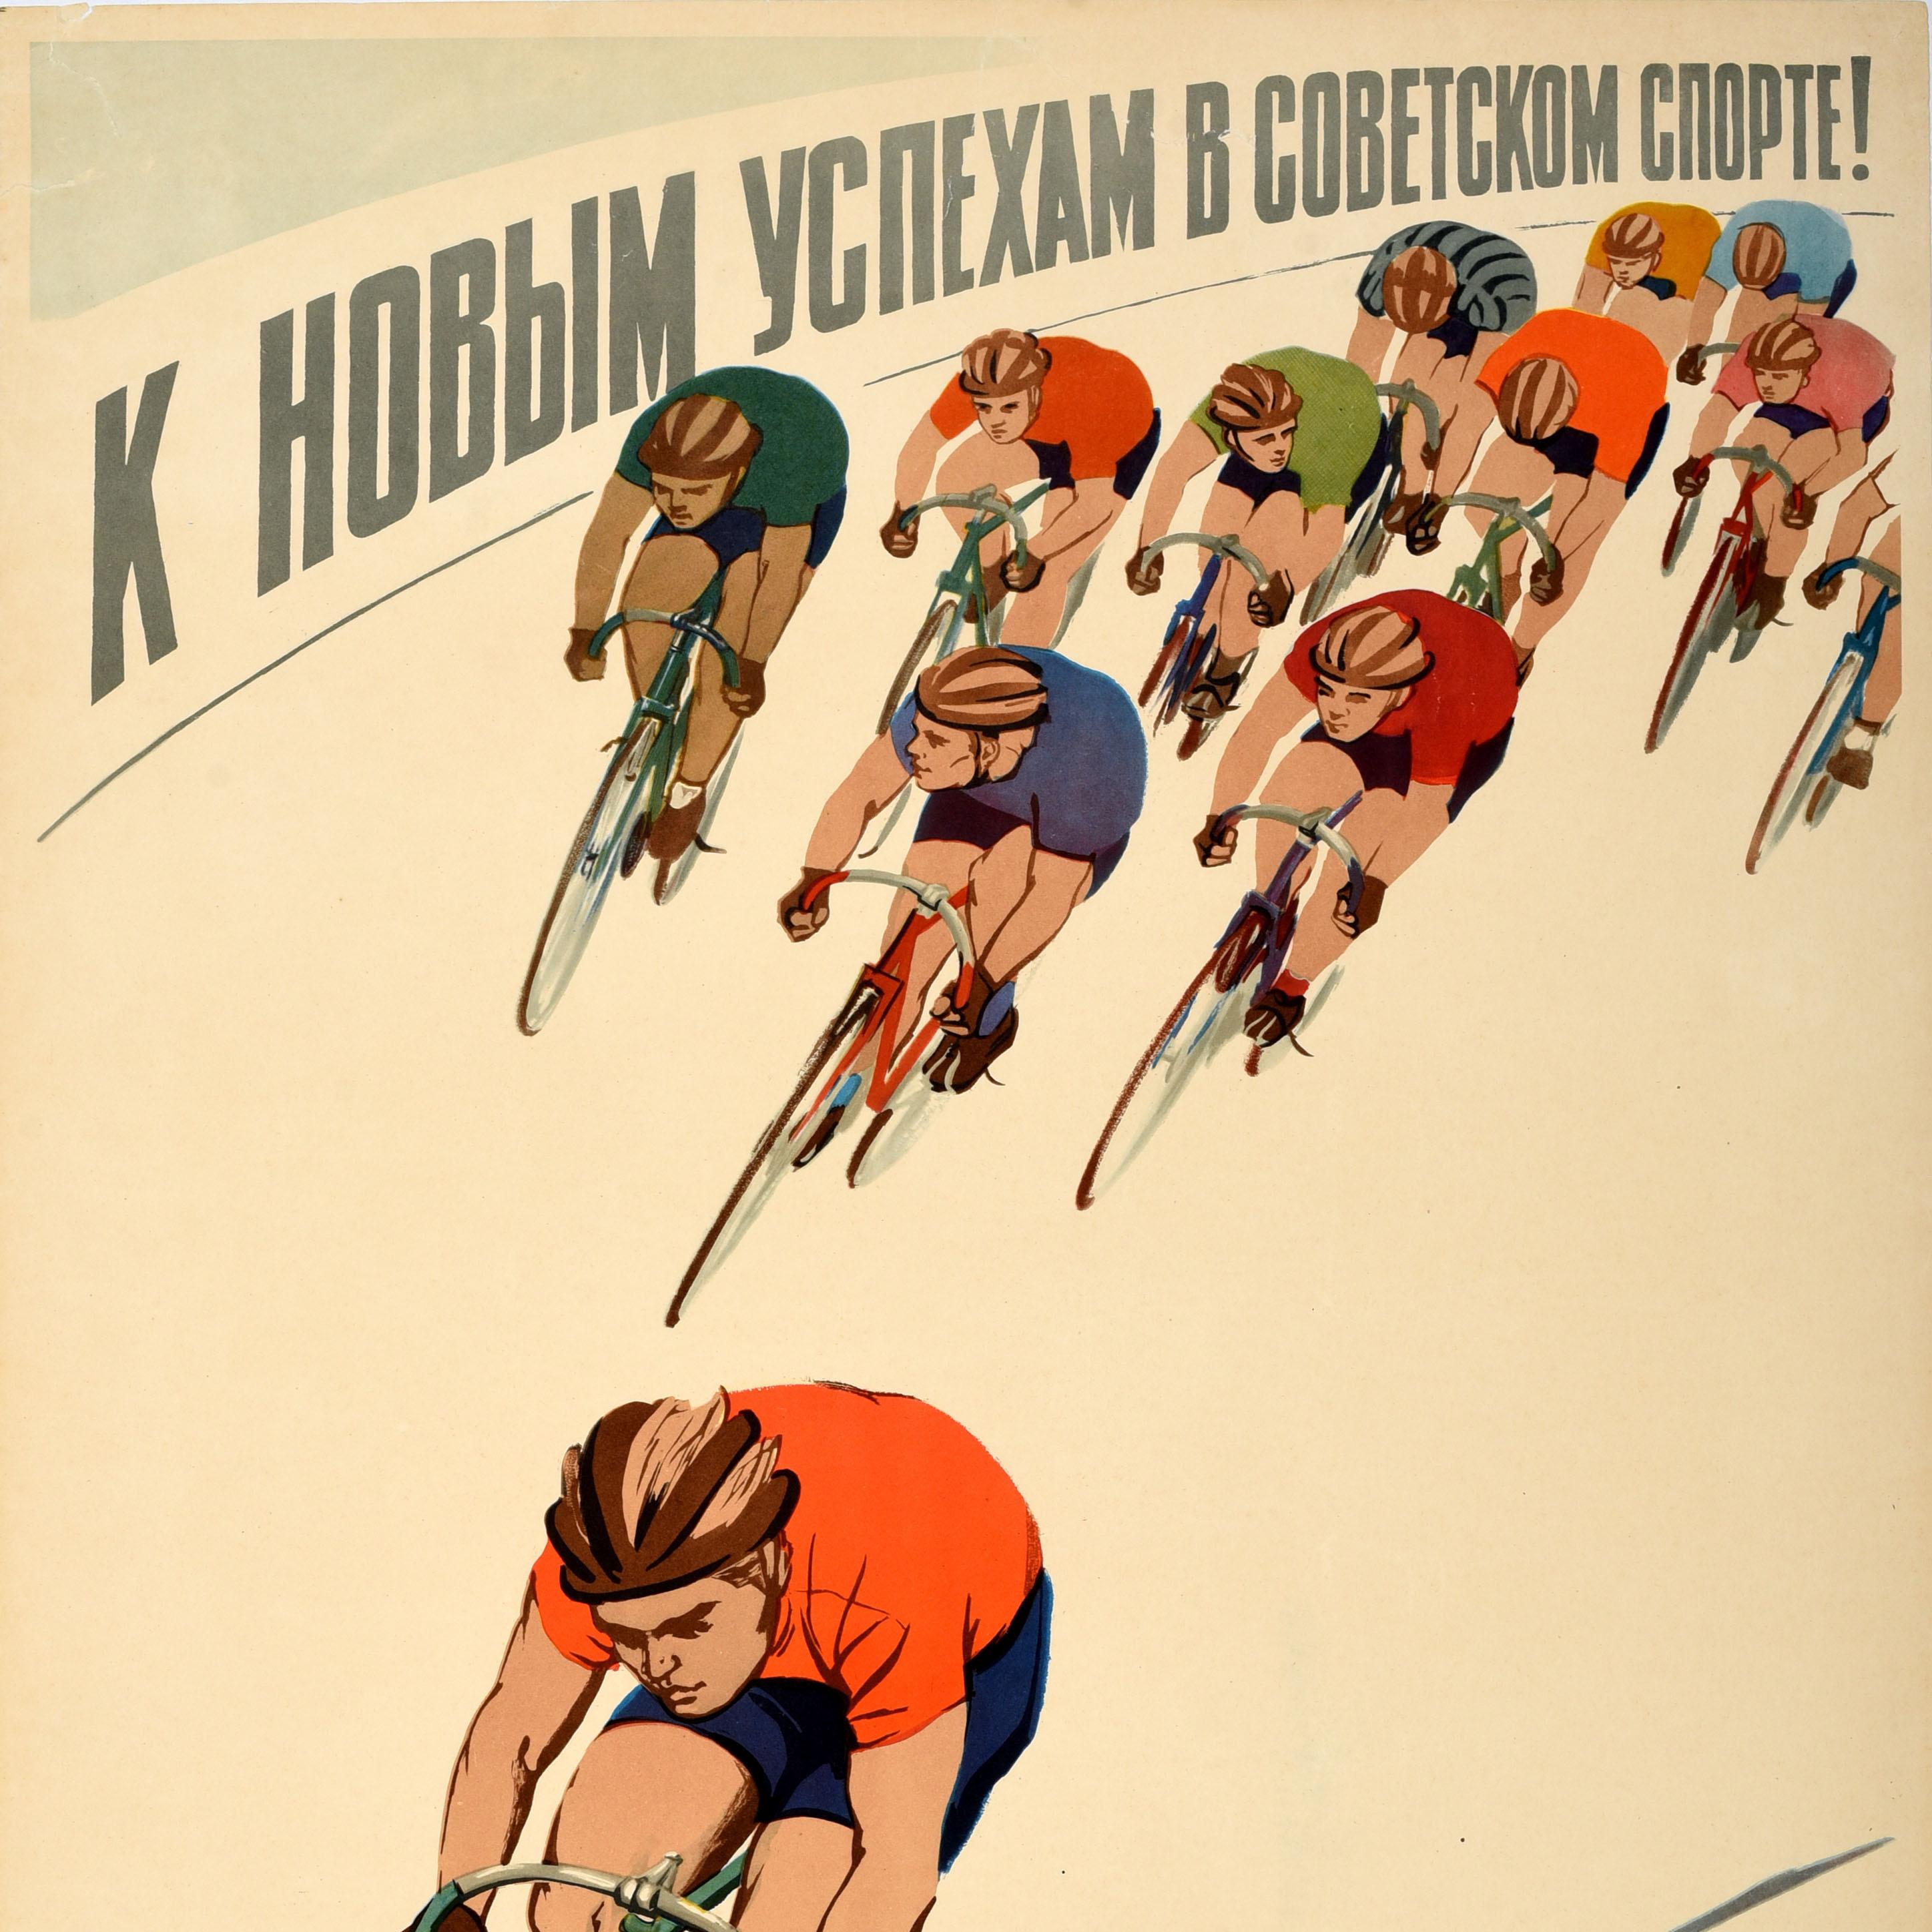 Original vintage bicycle sport poster - To New Successes in Soviet Sports / К новым успехам в советском спорте! - featuring a great graphic design depicting cyclists racing around a velodrome at speed wearing cycling helmets and different coloured